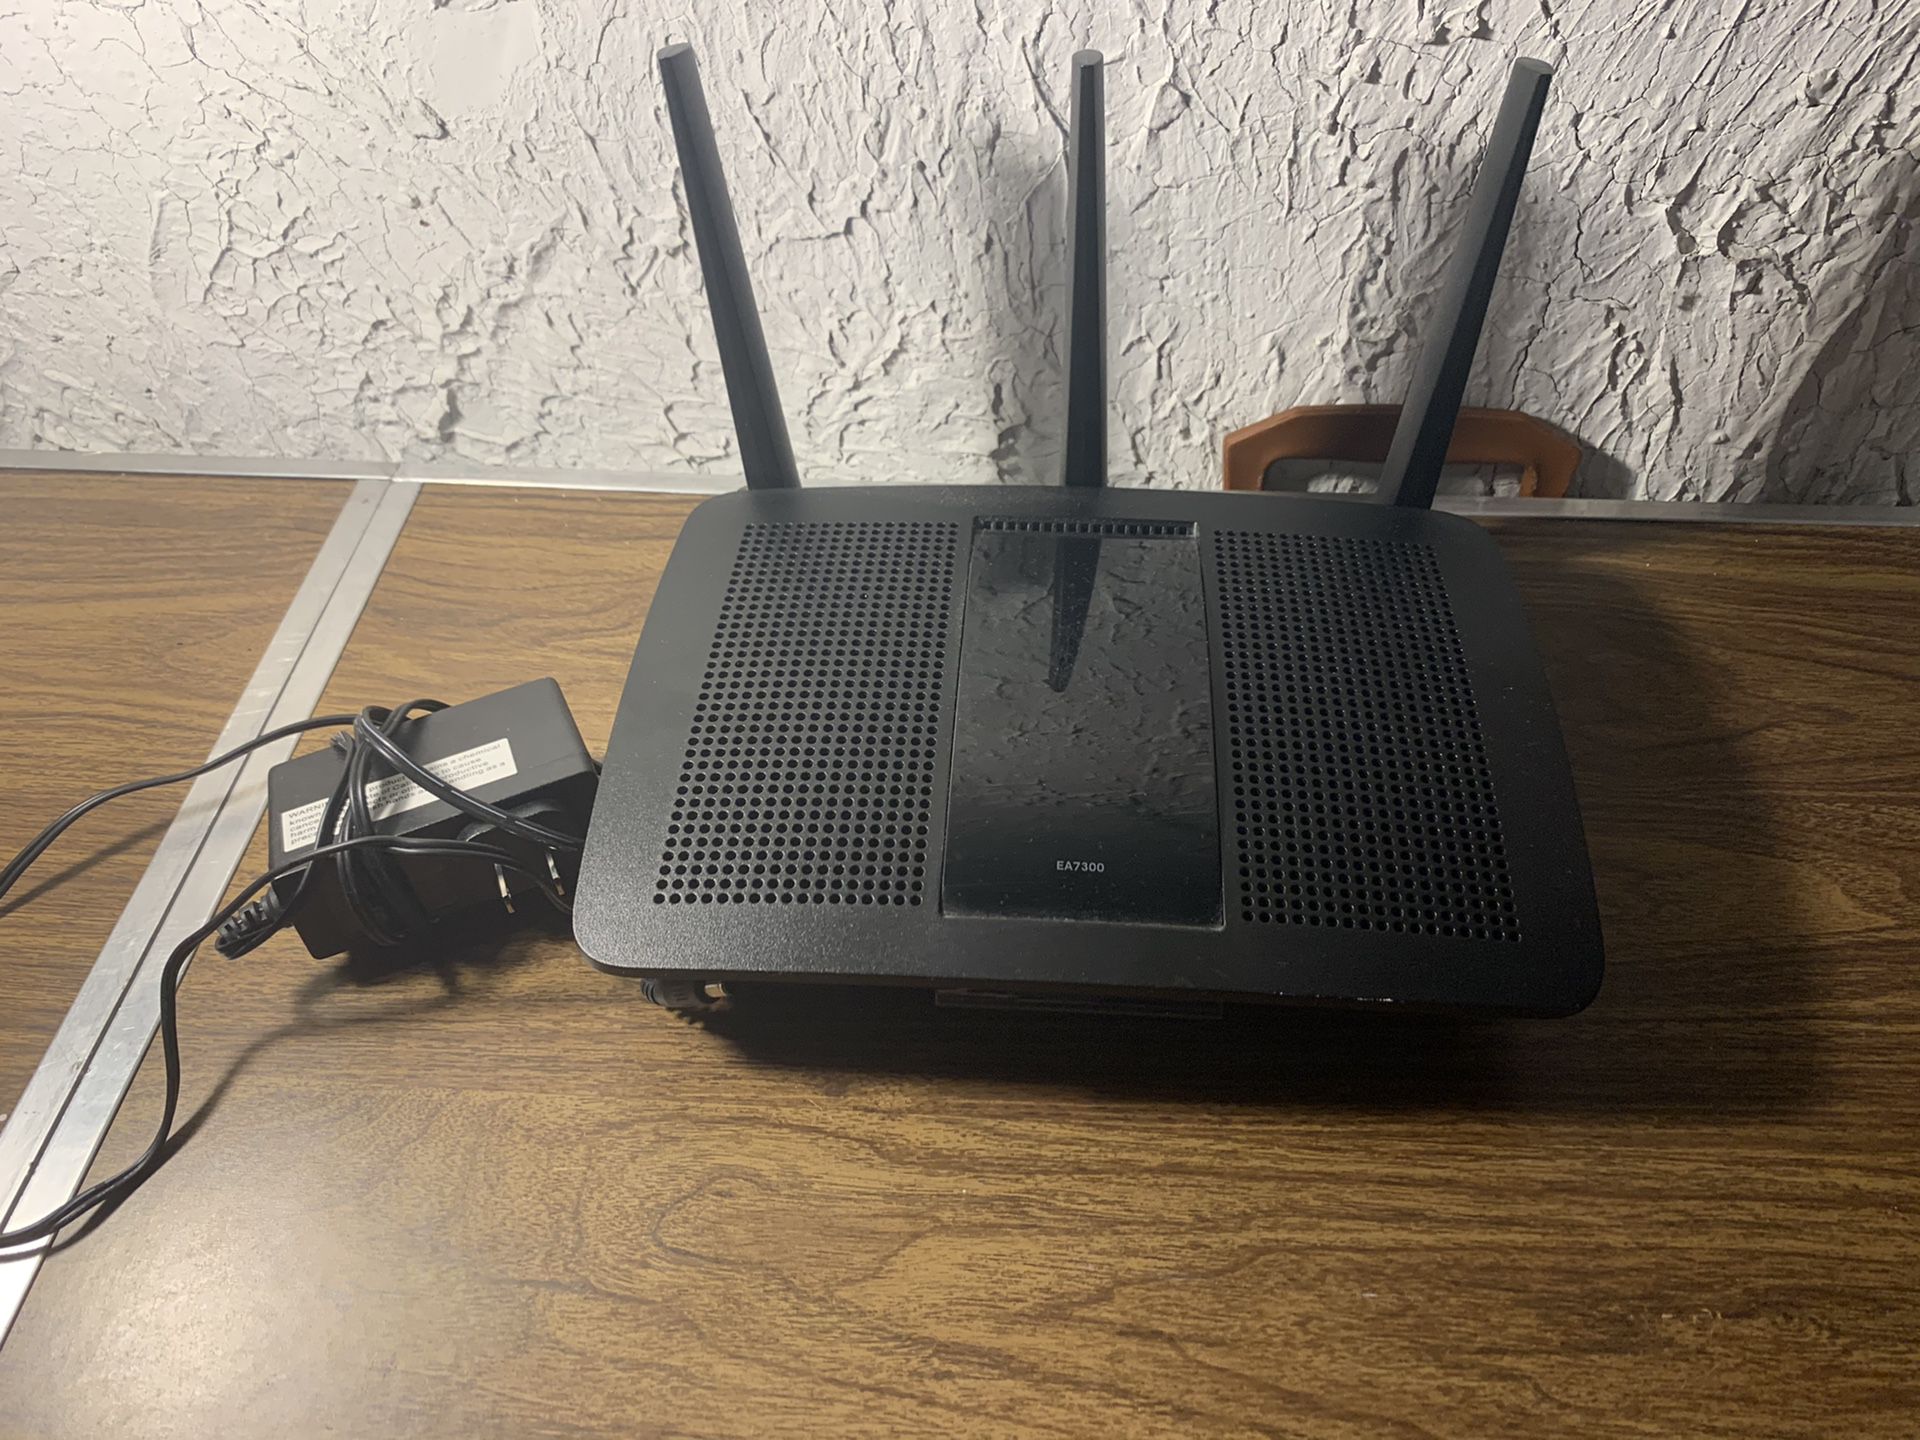 Linksys AE7300 Home Router